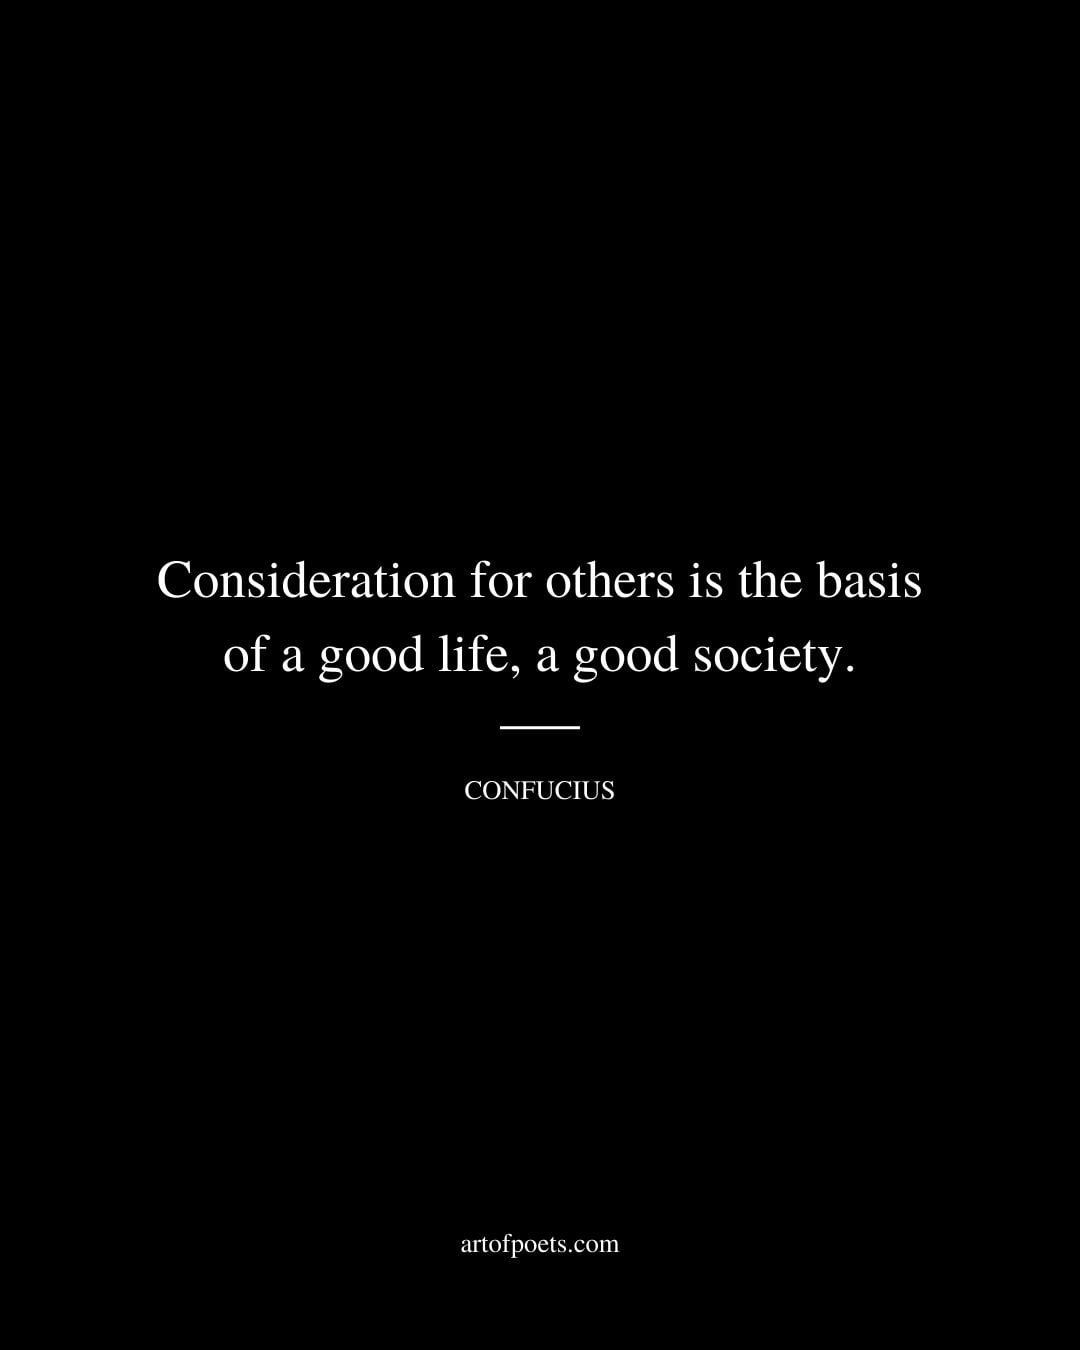 Consideration for others is the basis of a good life a good society 1